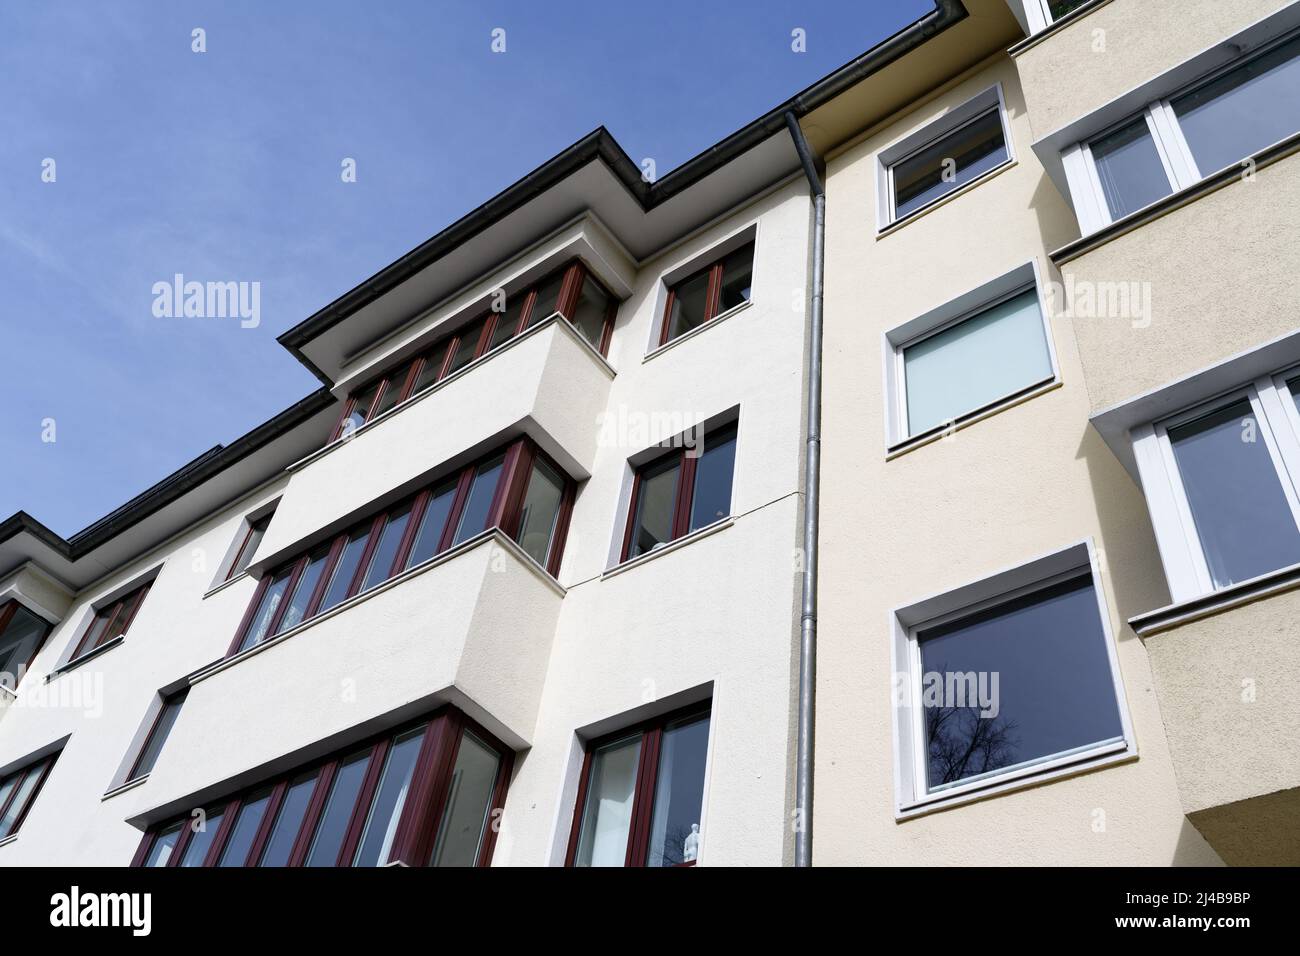 typical rental houses with corner windows from the 1920s in cologne Stock Photo